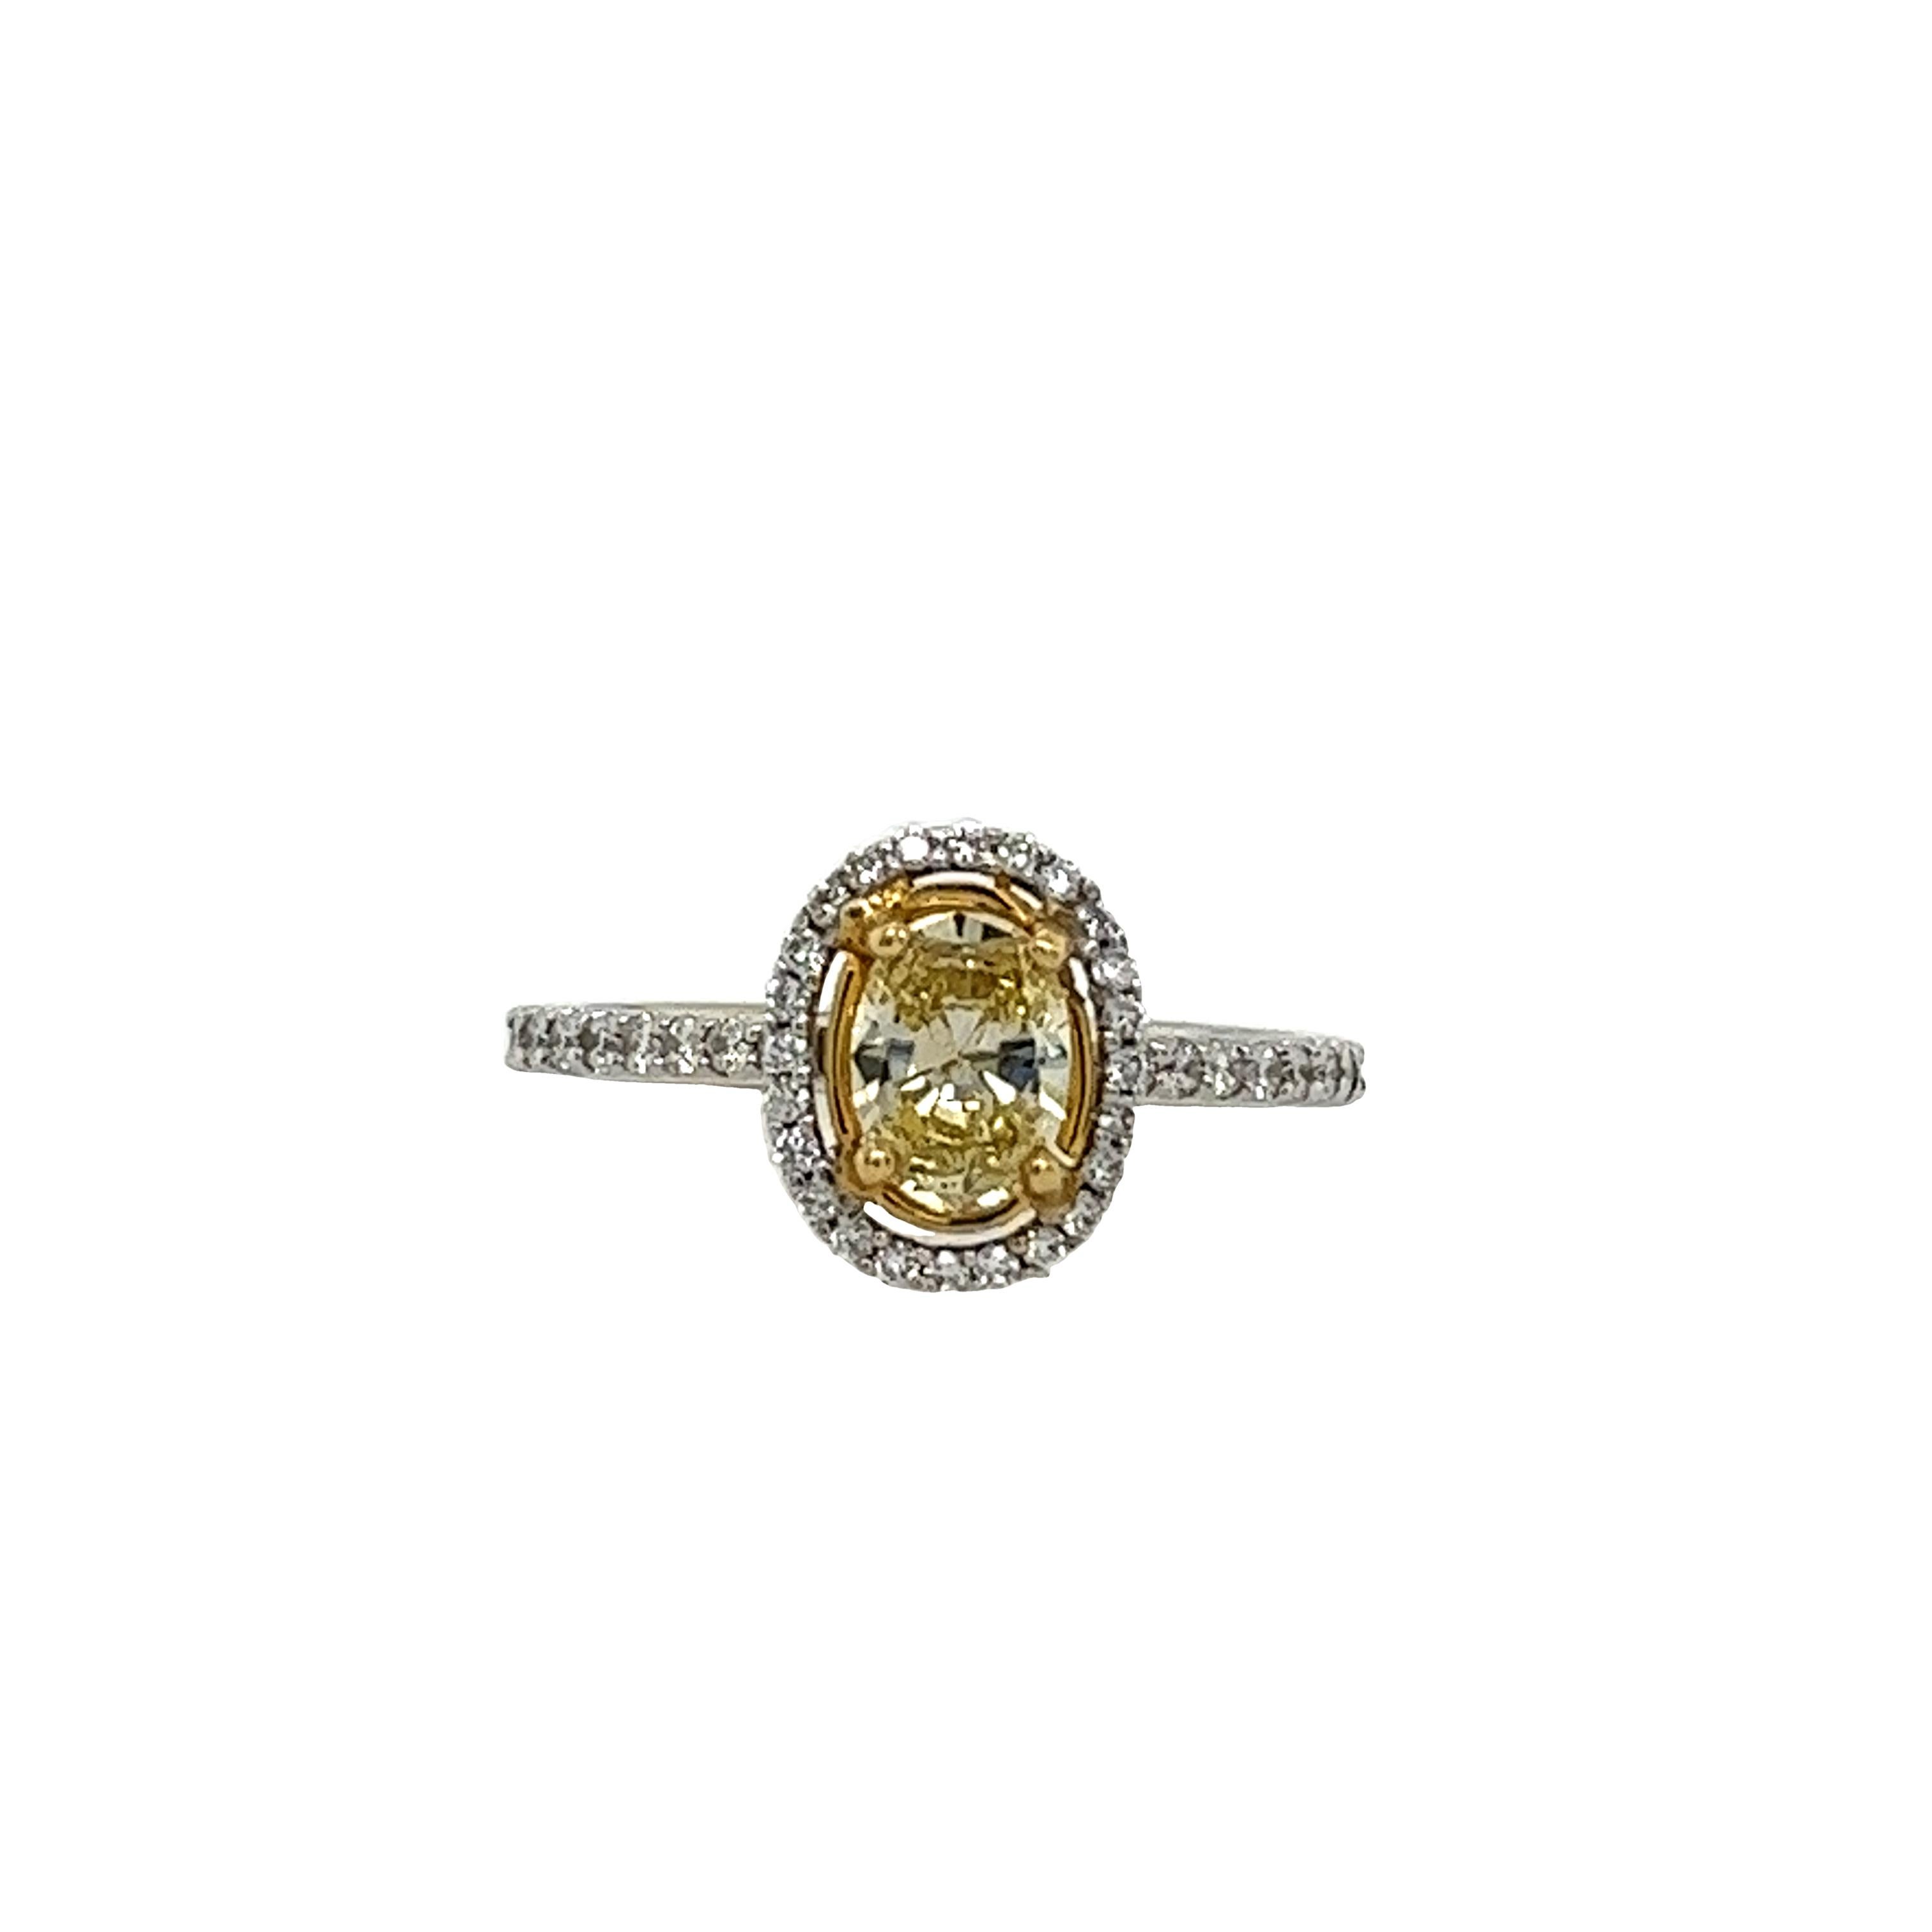 18ct White & Yellow Gold Ring Set With 0.63ct Fancy Yellow SI1 Oval Diamond For Sale 6